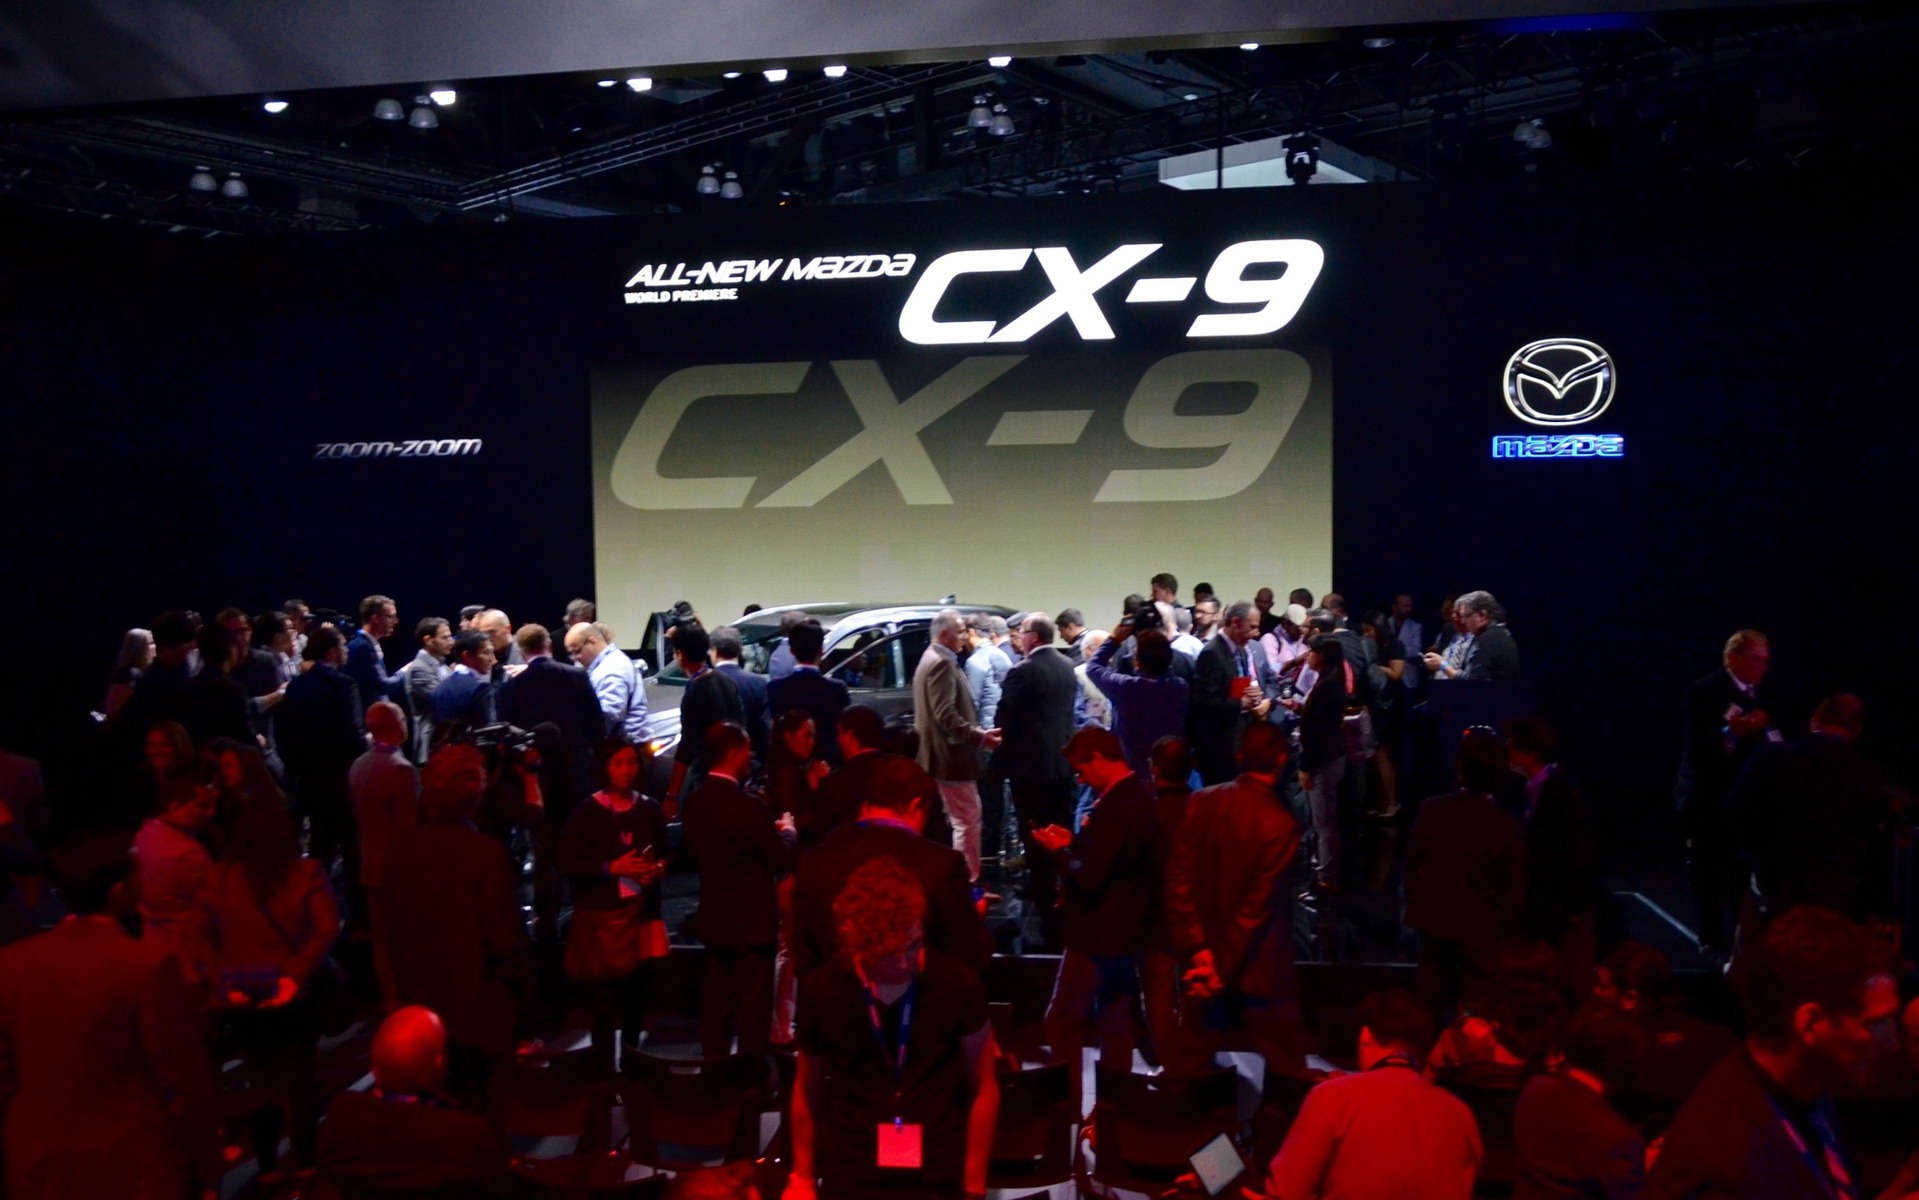 The 2016 Mazda CX-9's launch at the 2015 Los Angeles Auto Show.